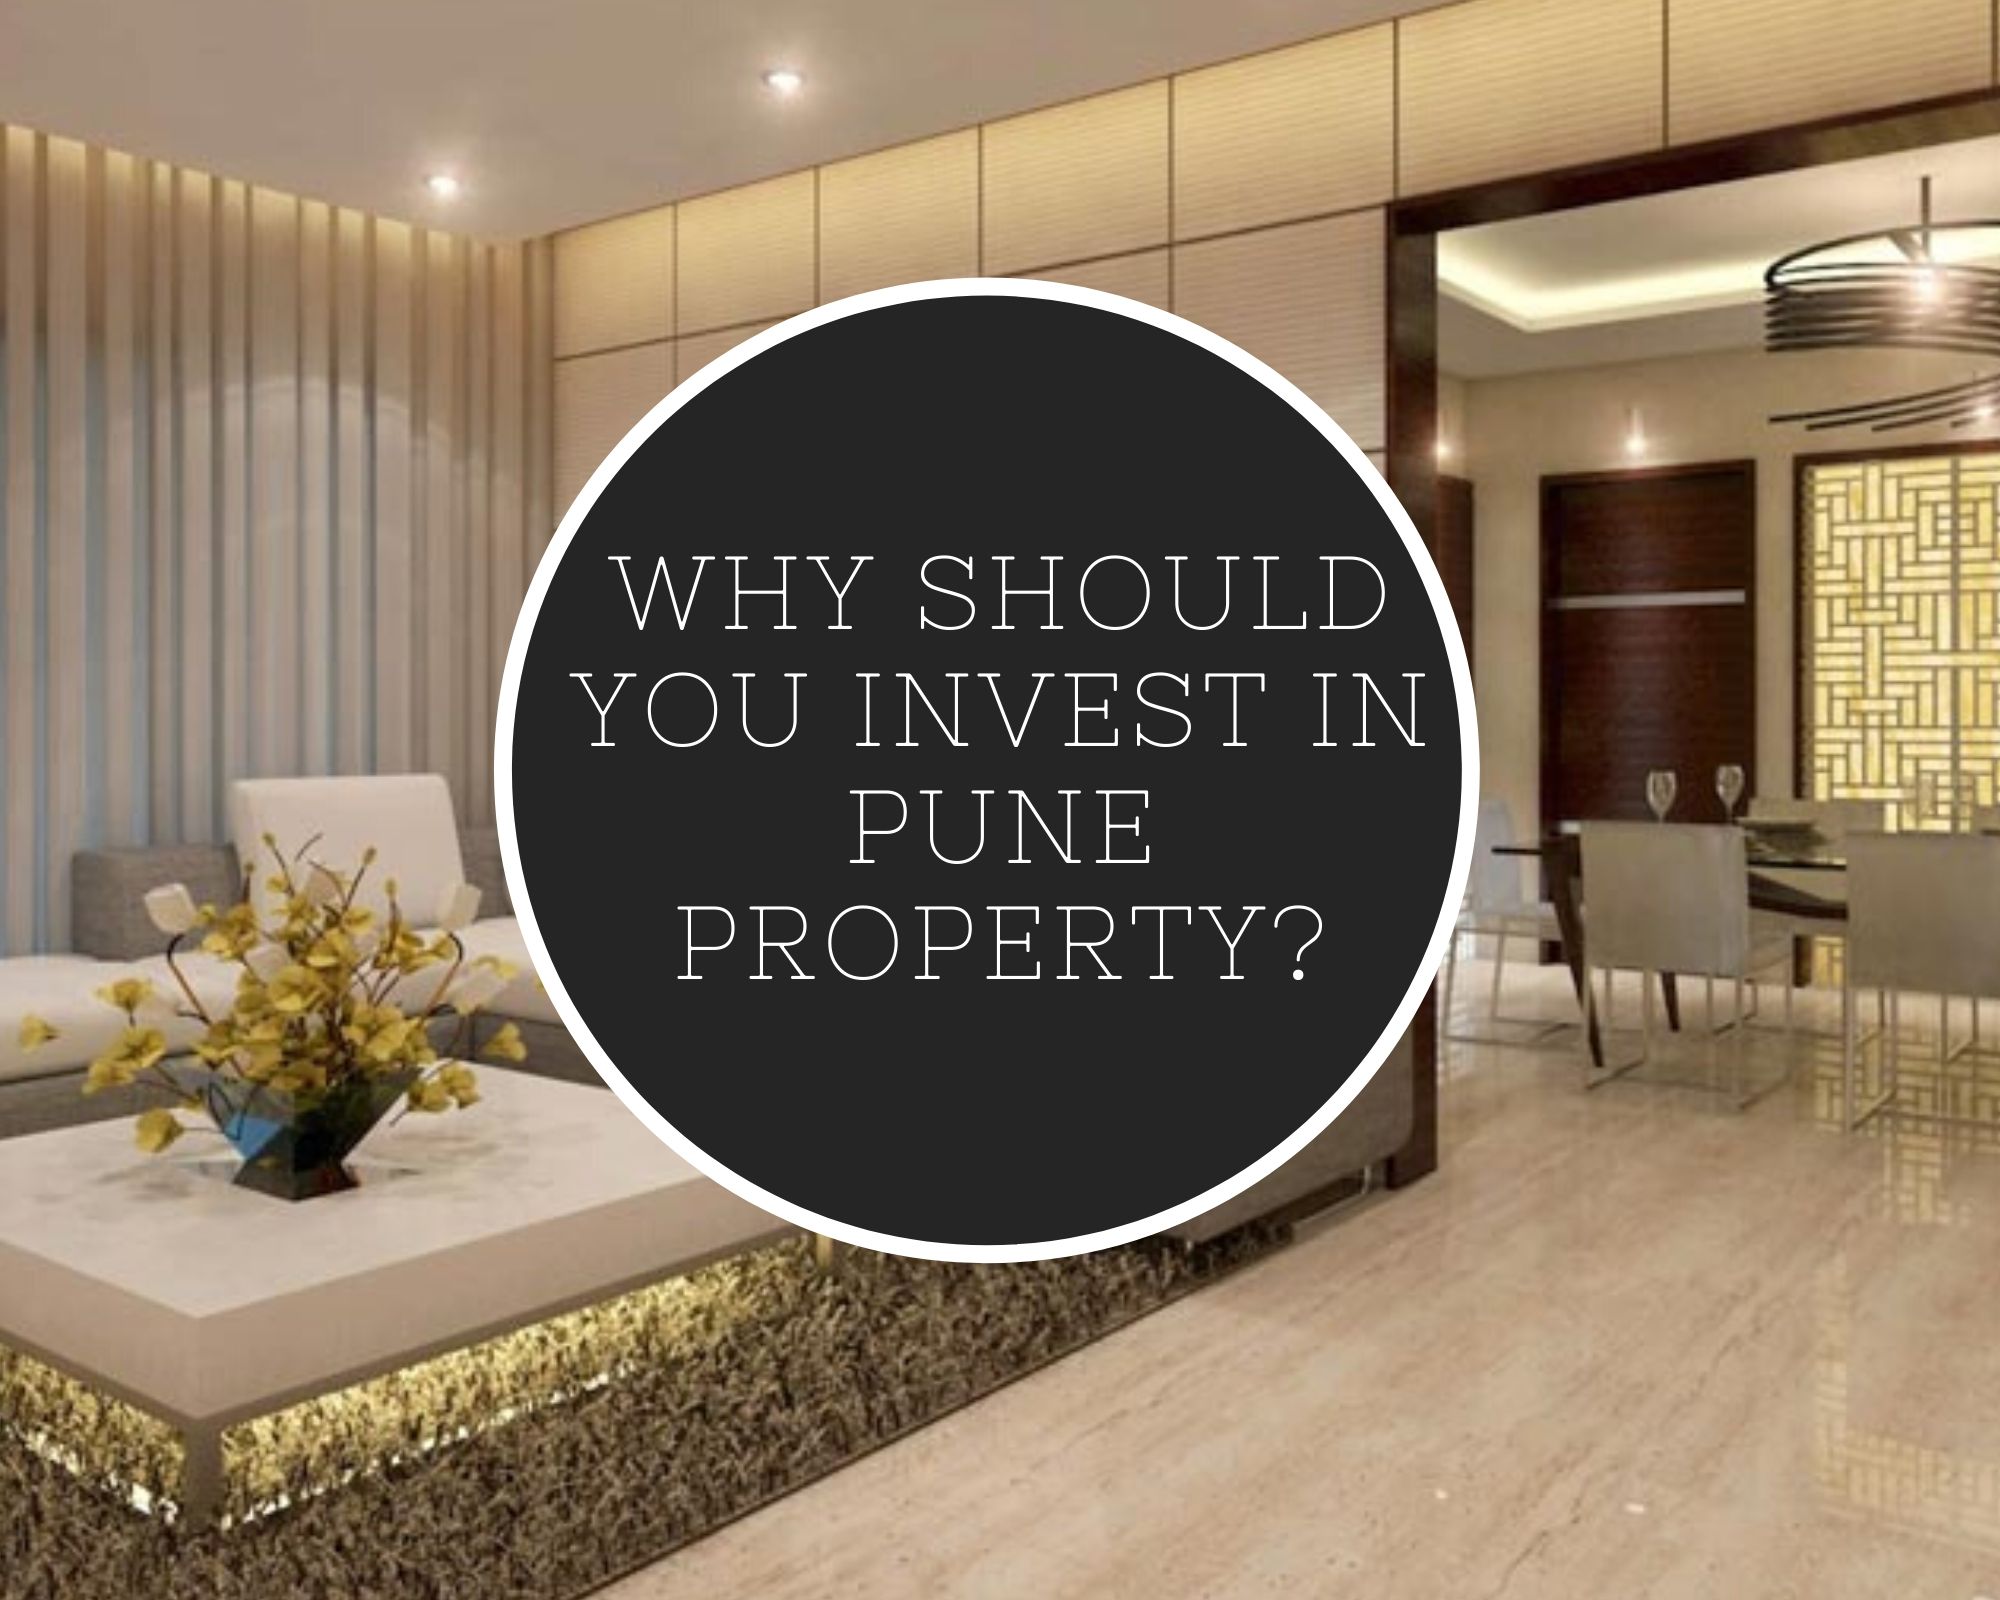 Why should you invest in Pune property?